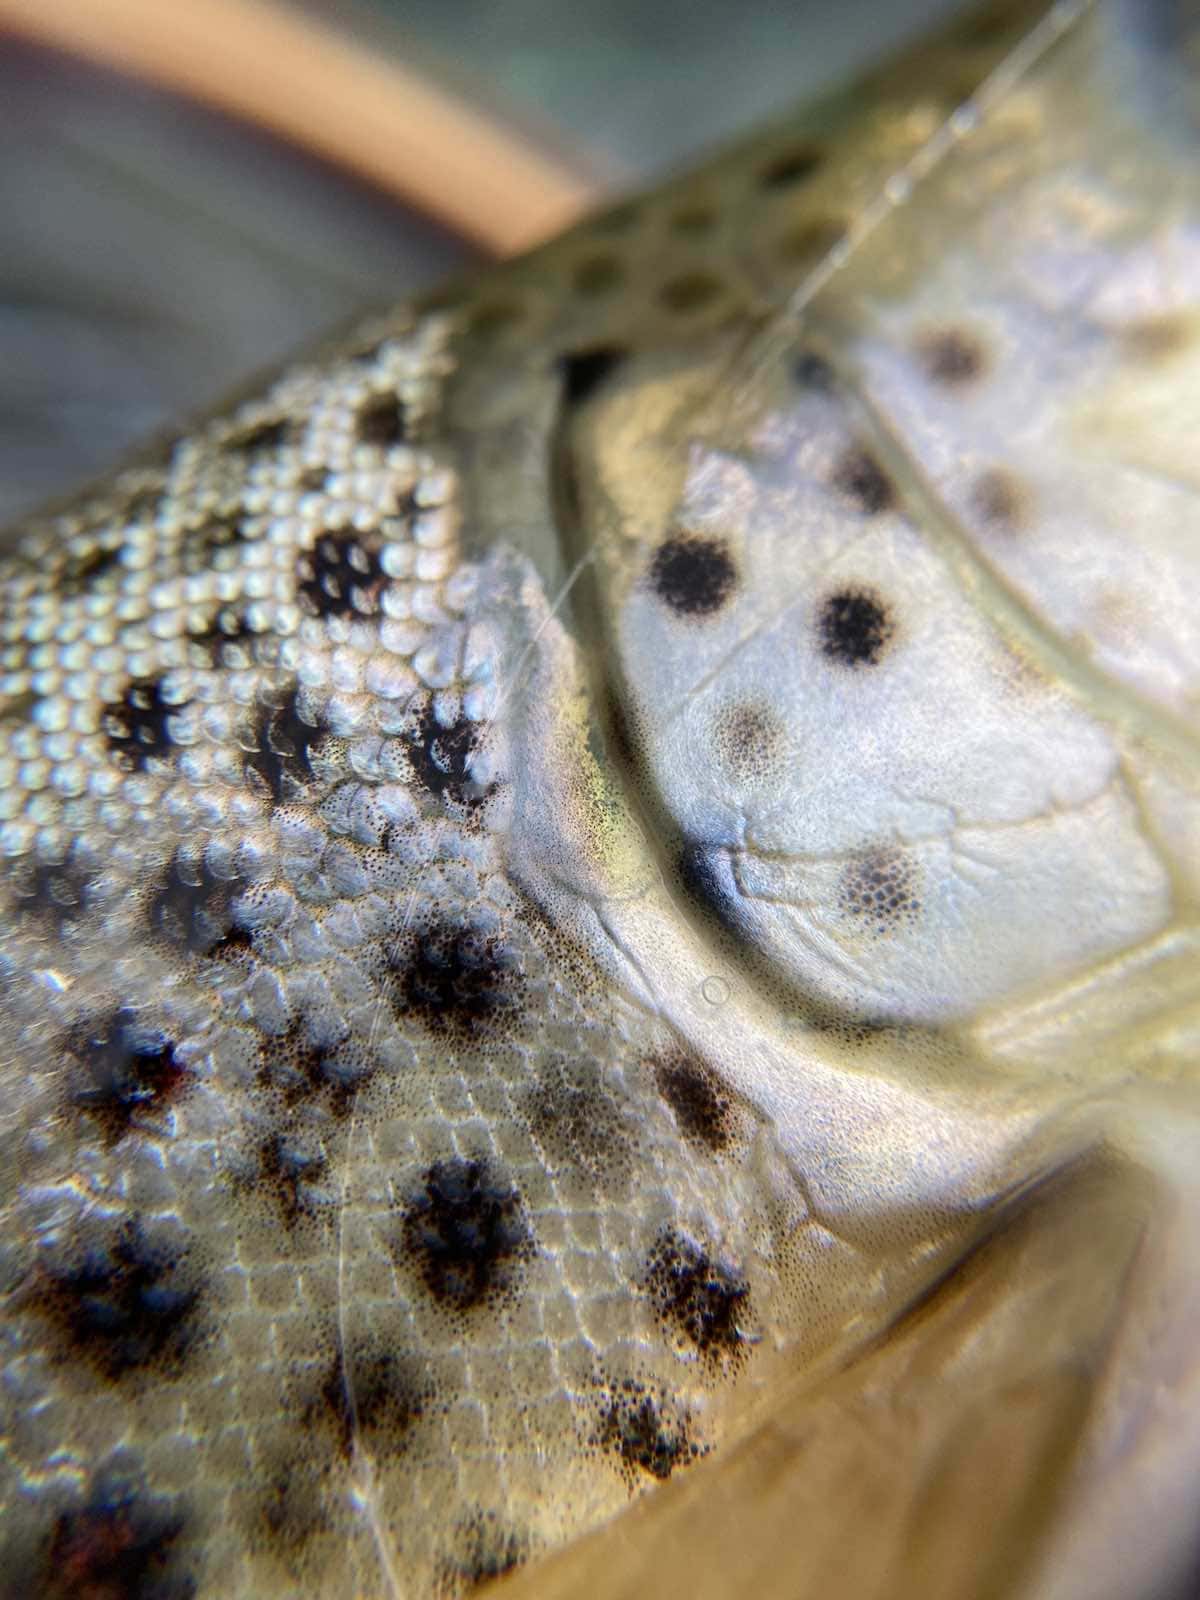 Scales on the gill plates of trout